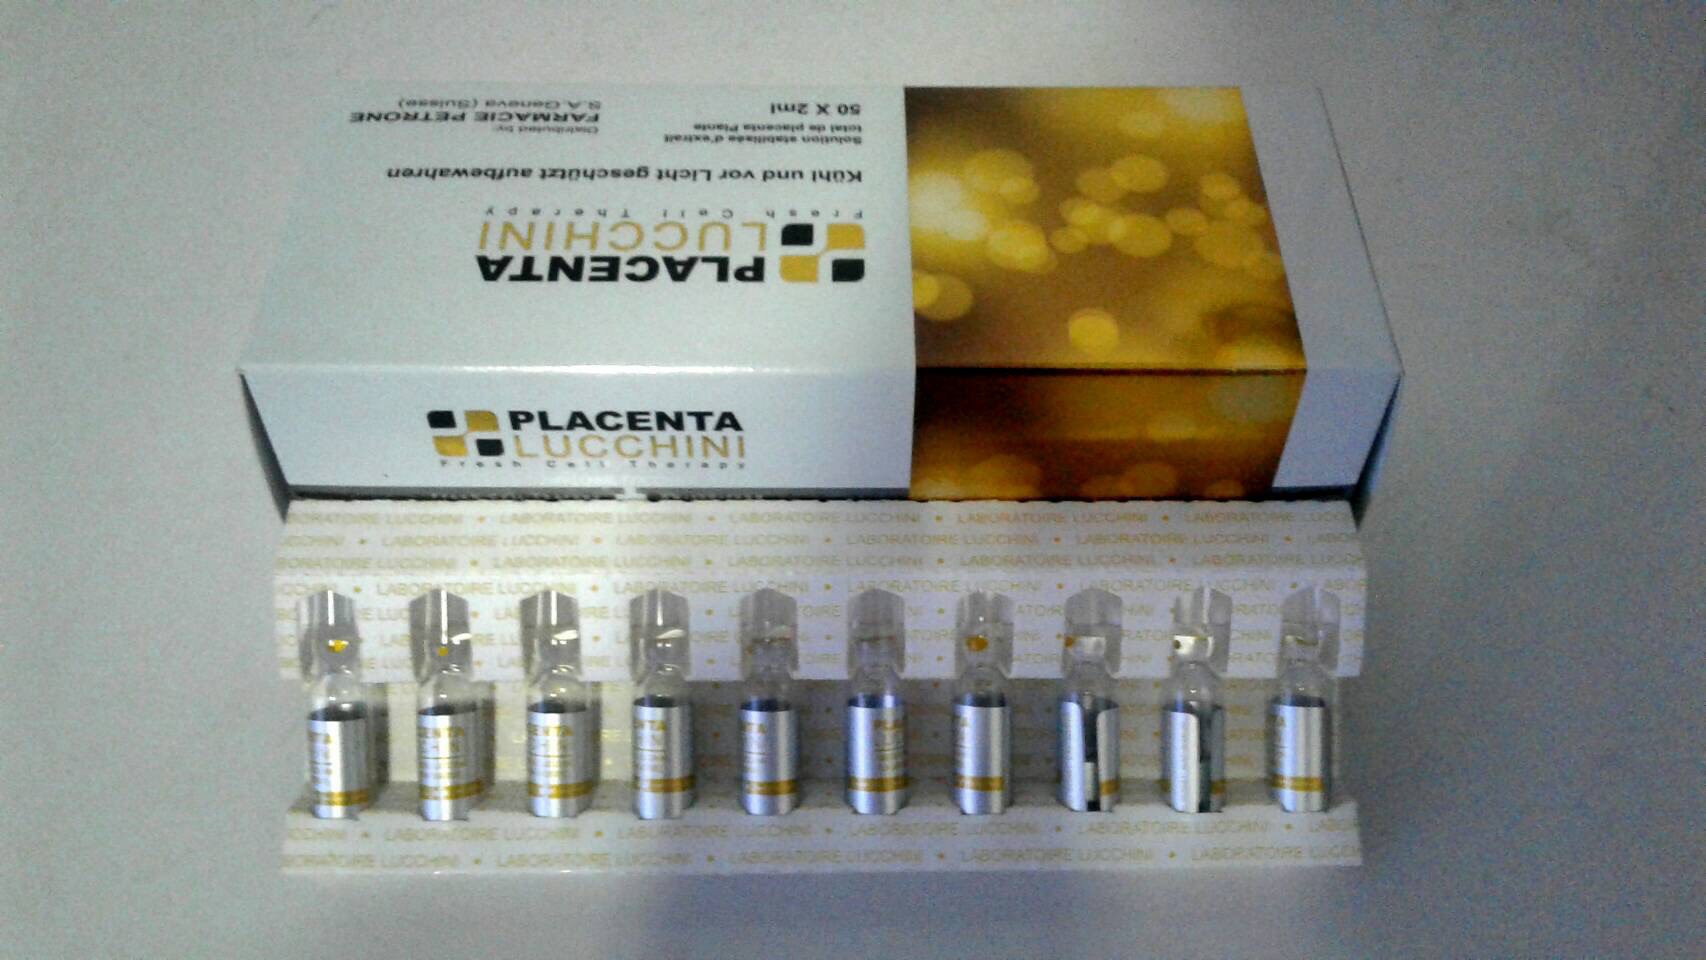 PLACENTA LUCCHINI PLANT GOLD (SWISS) INJECTION by "www.ccthaitown.com"